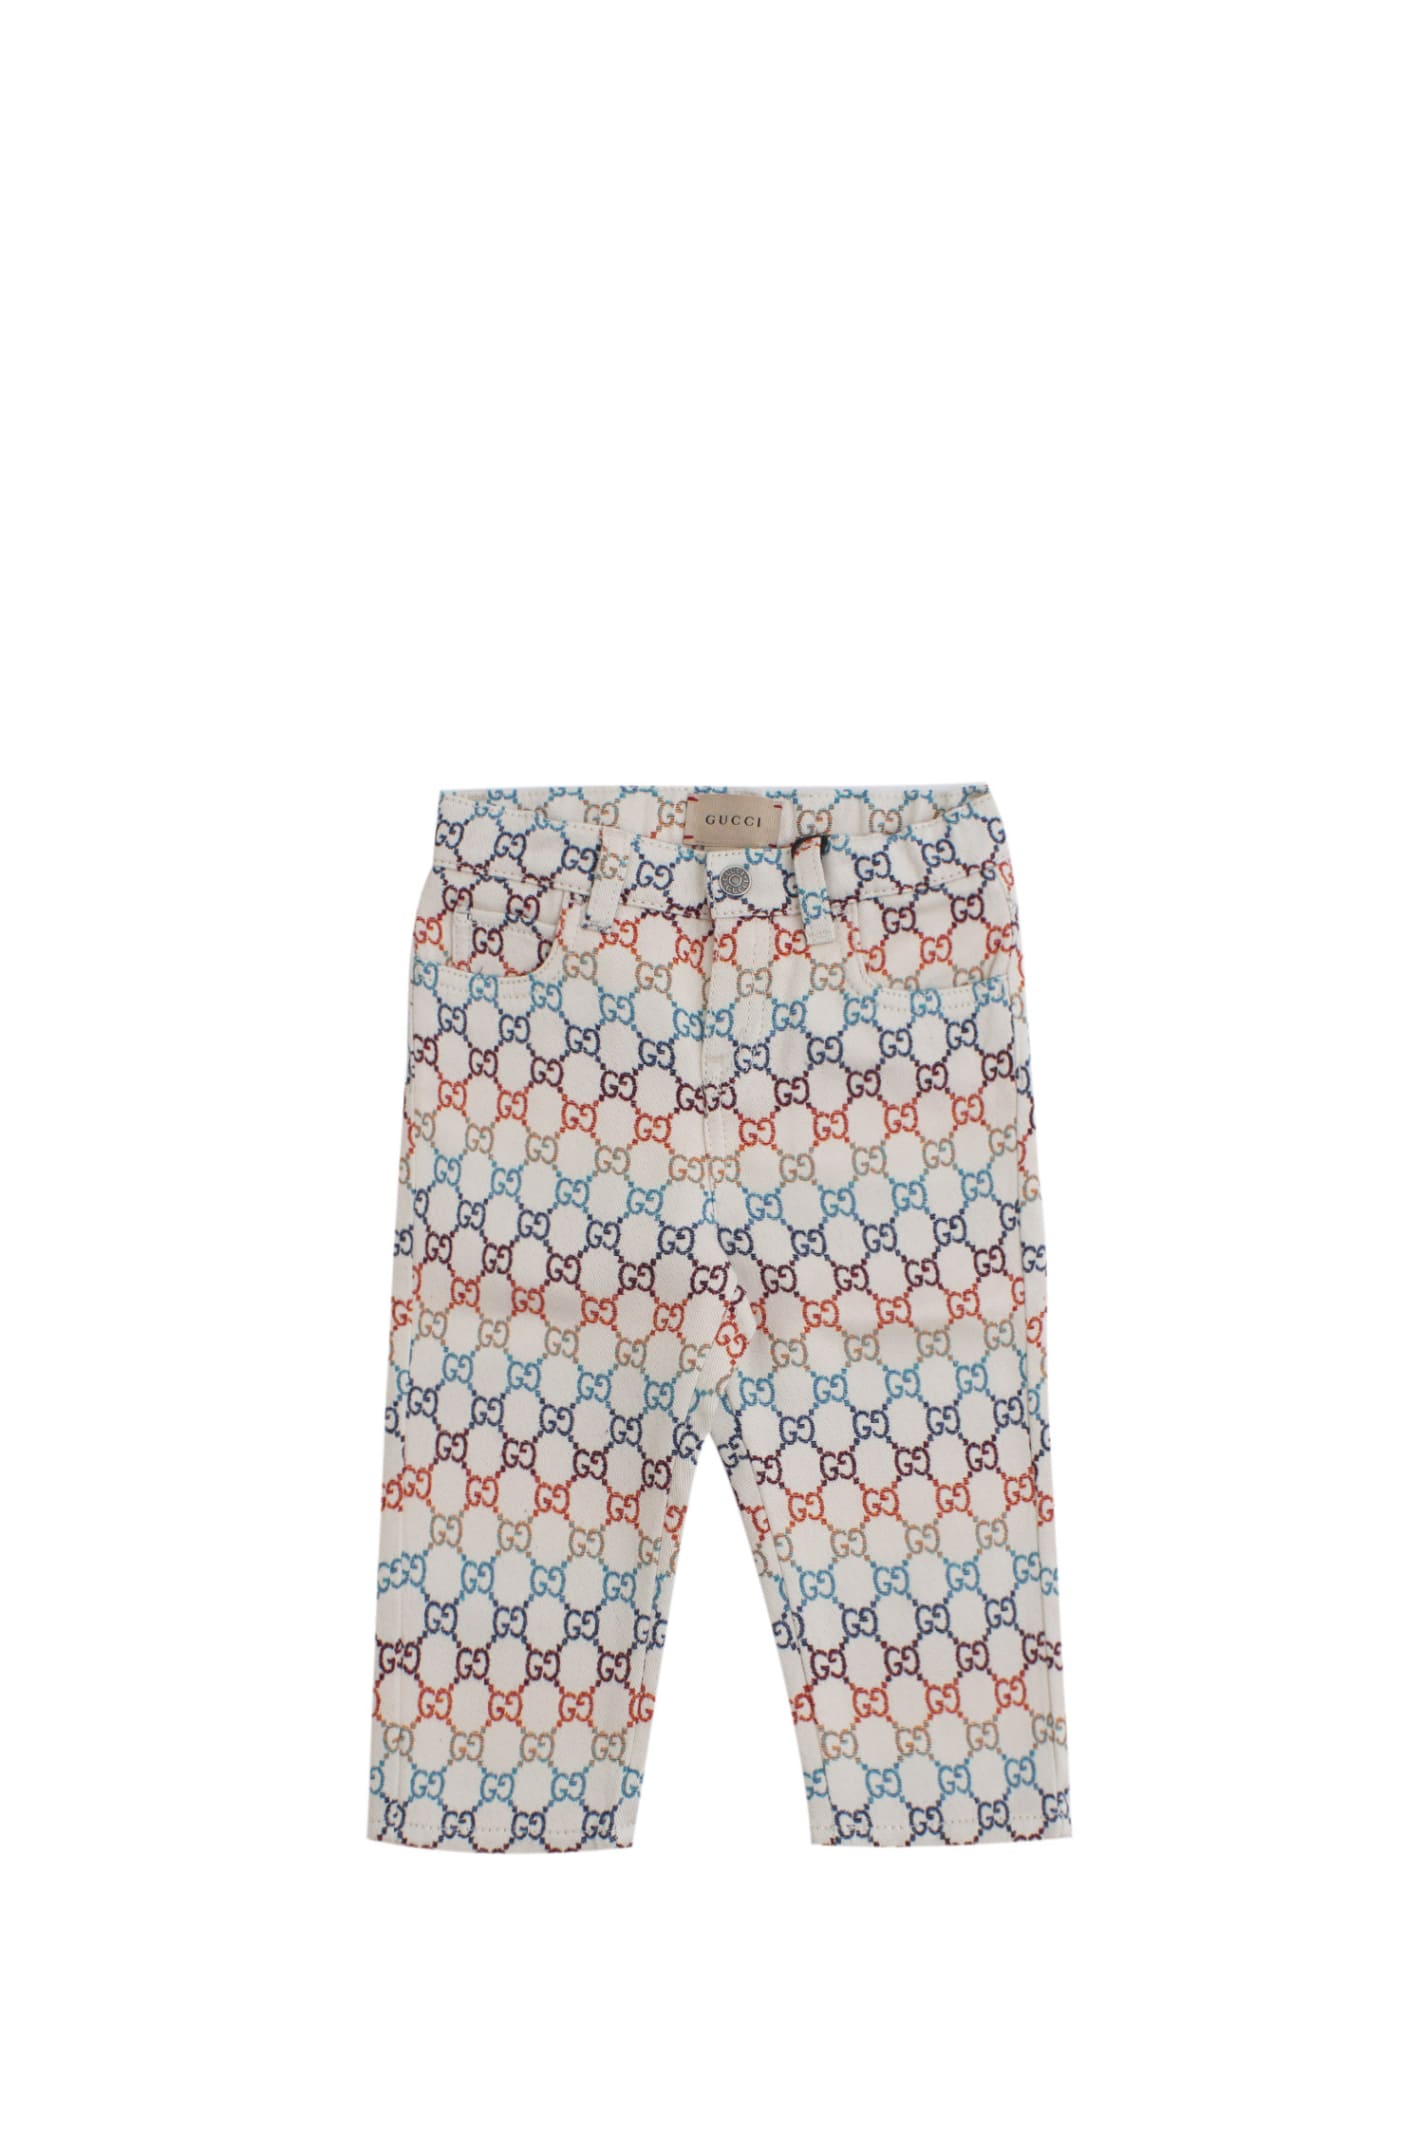 Gucci Babies' Gg Cotton Jacquard Trousers In Multicolor